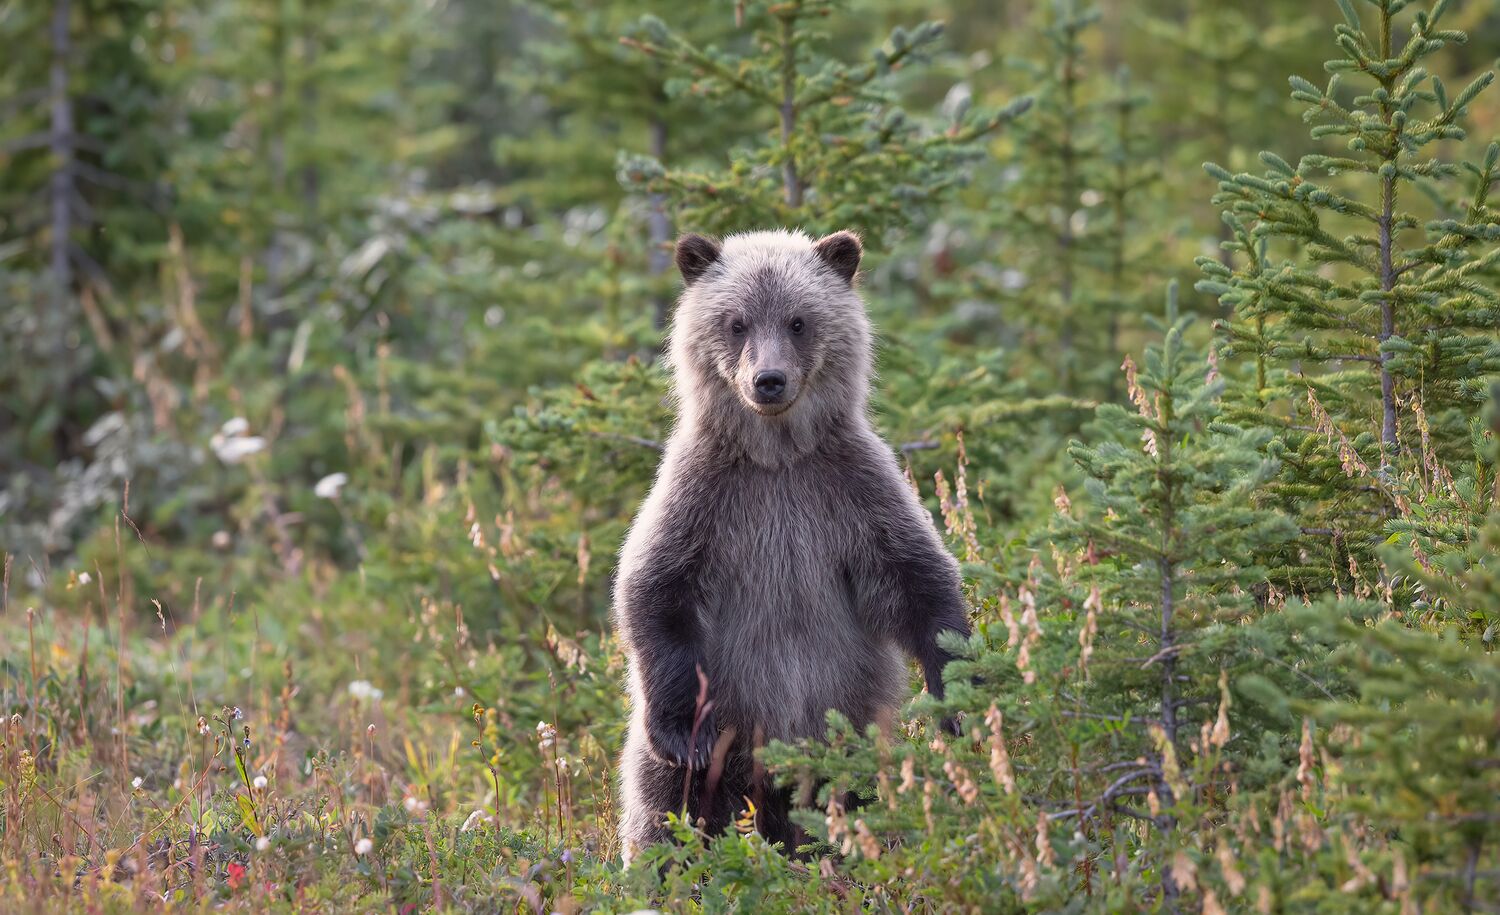 Grizzly bear cub standing on its hind legs in a field.